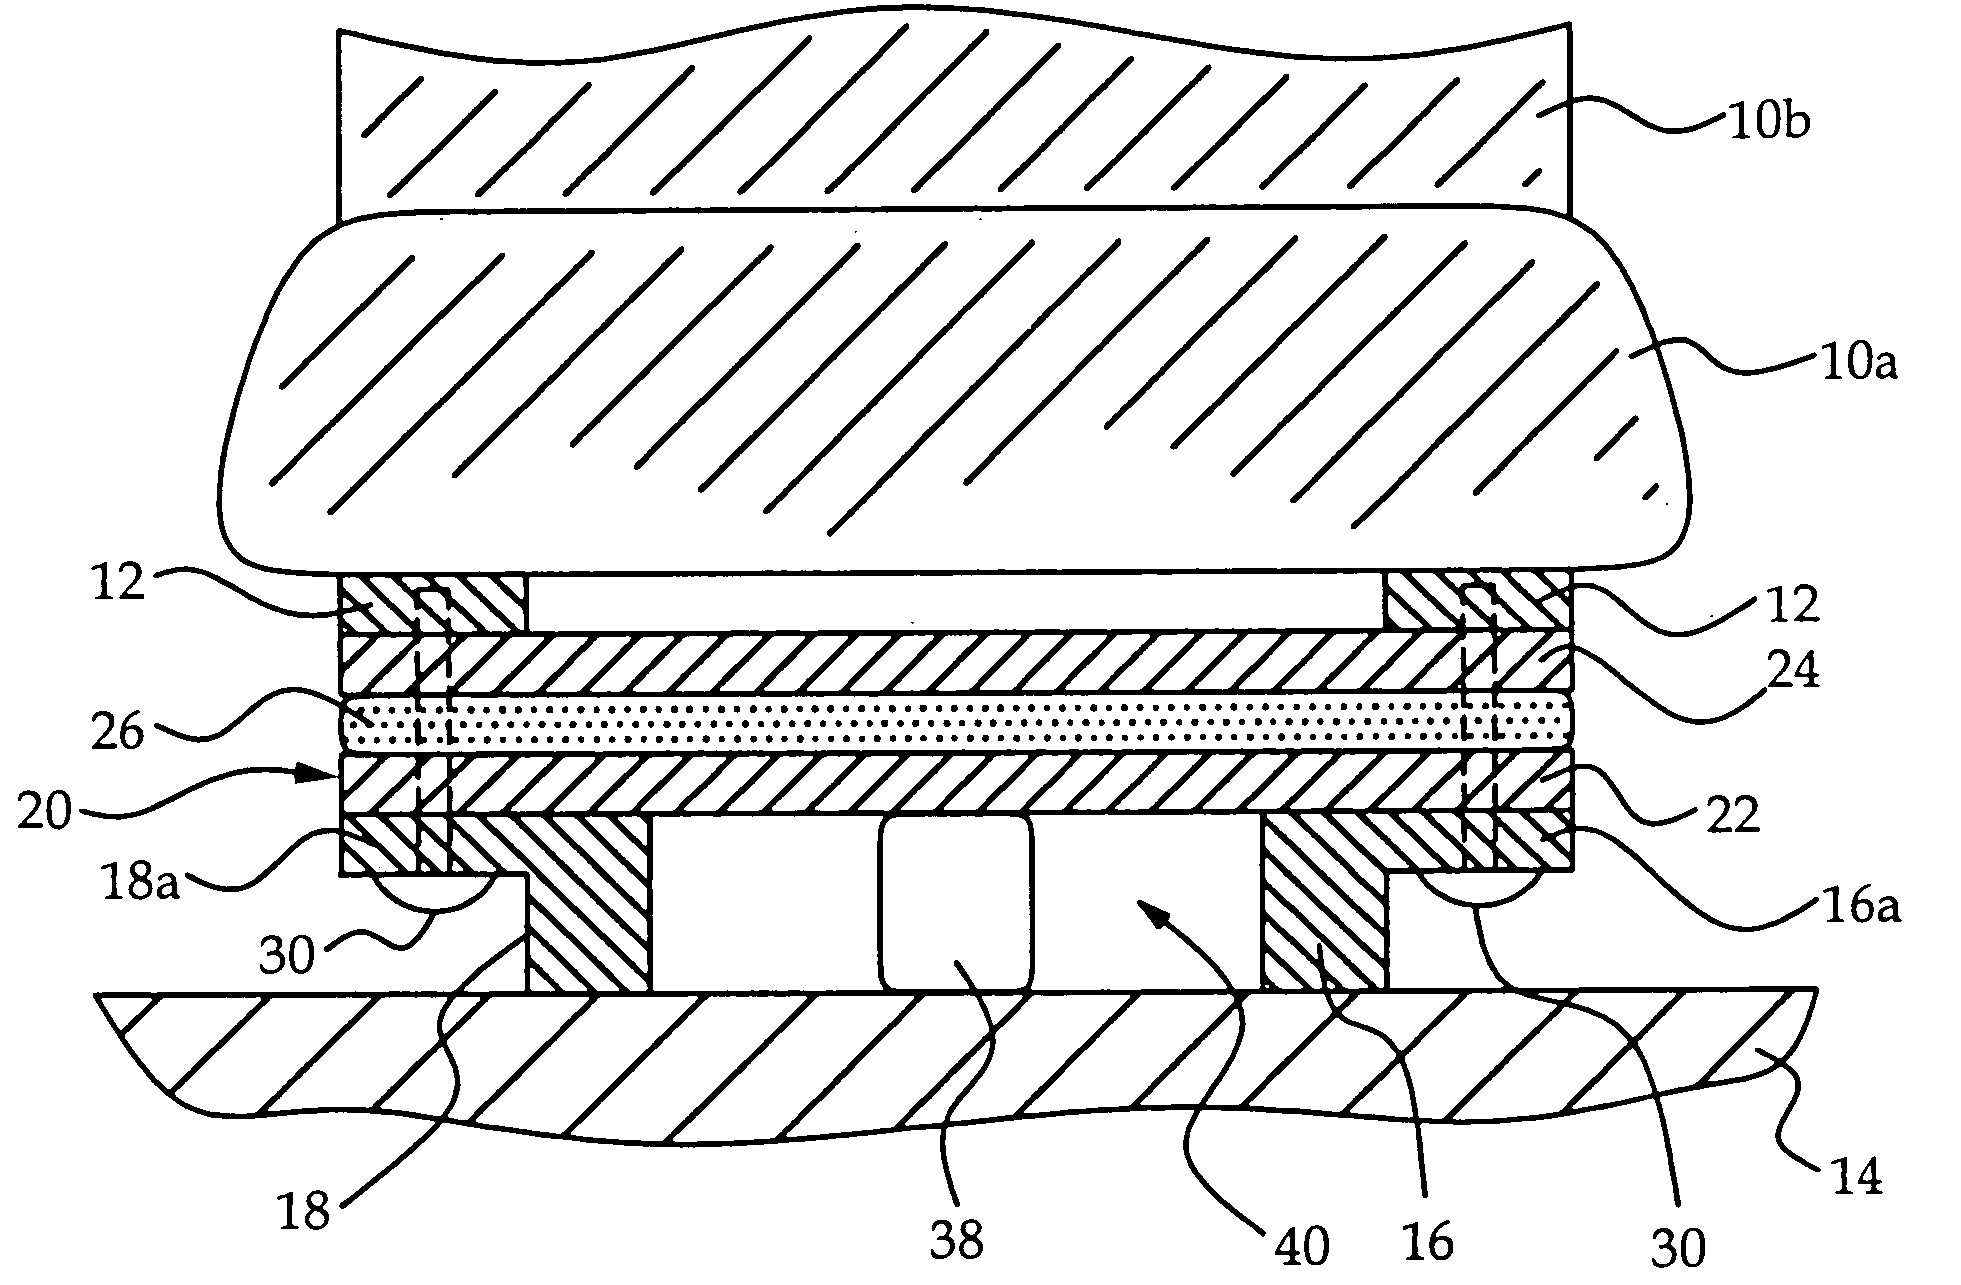 Frame-based bladder apparatus for seat occupant weight estimation